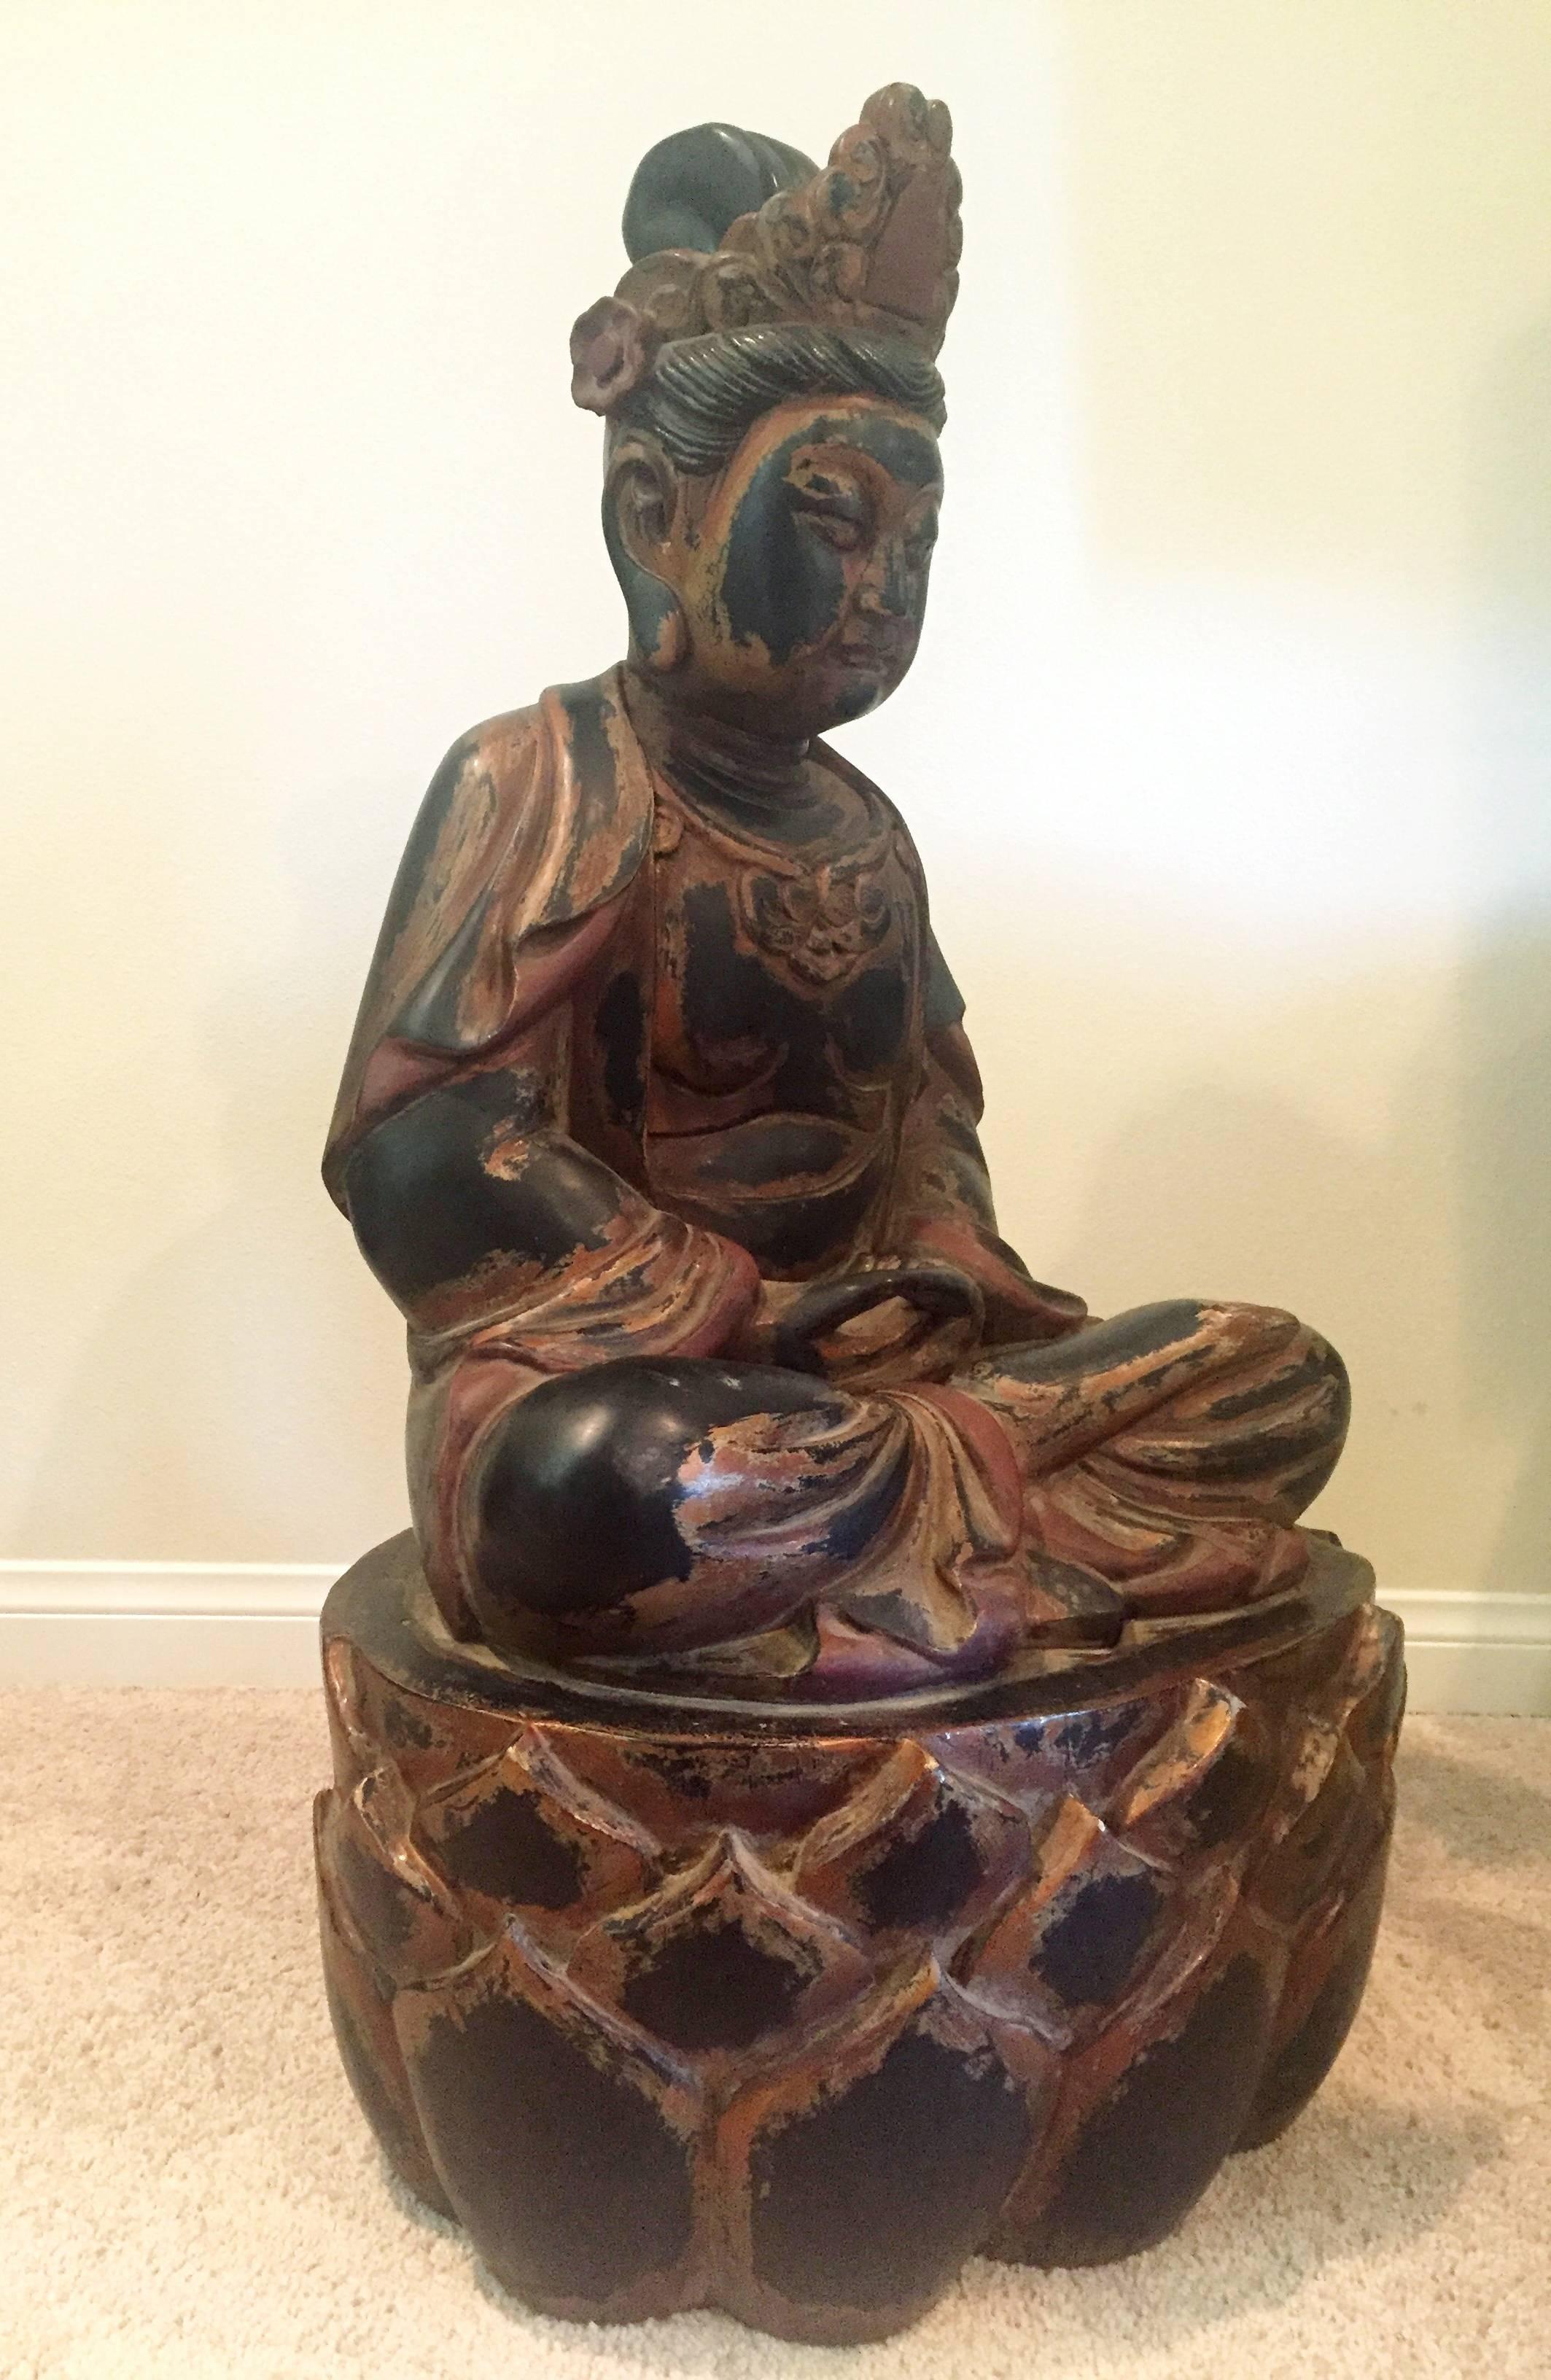 This stunning Buddha statue is carved of solid wood. At 40